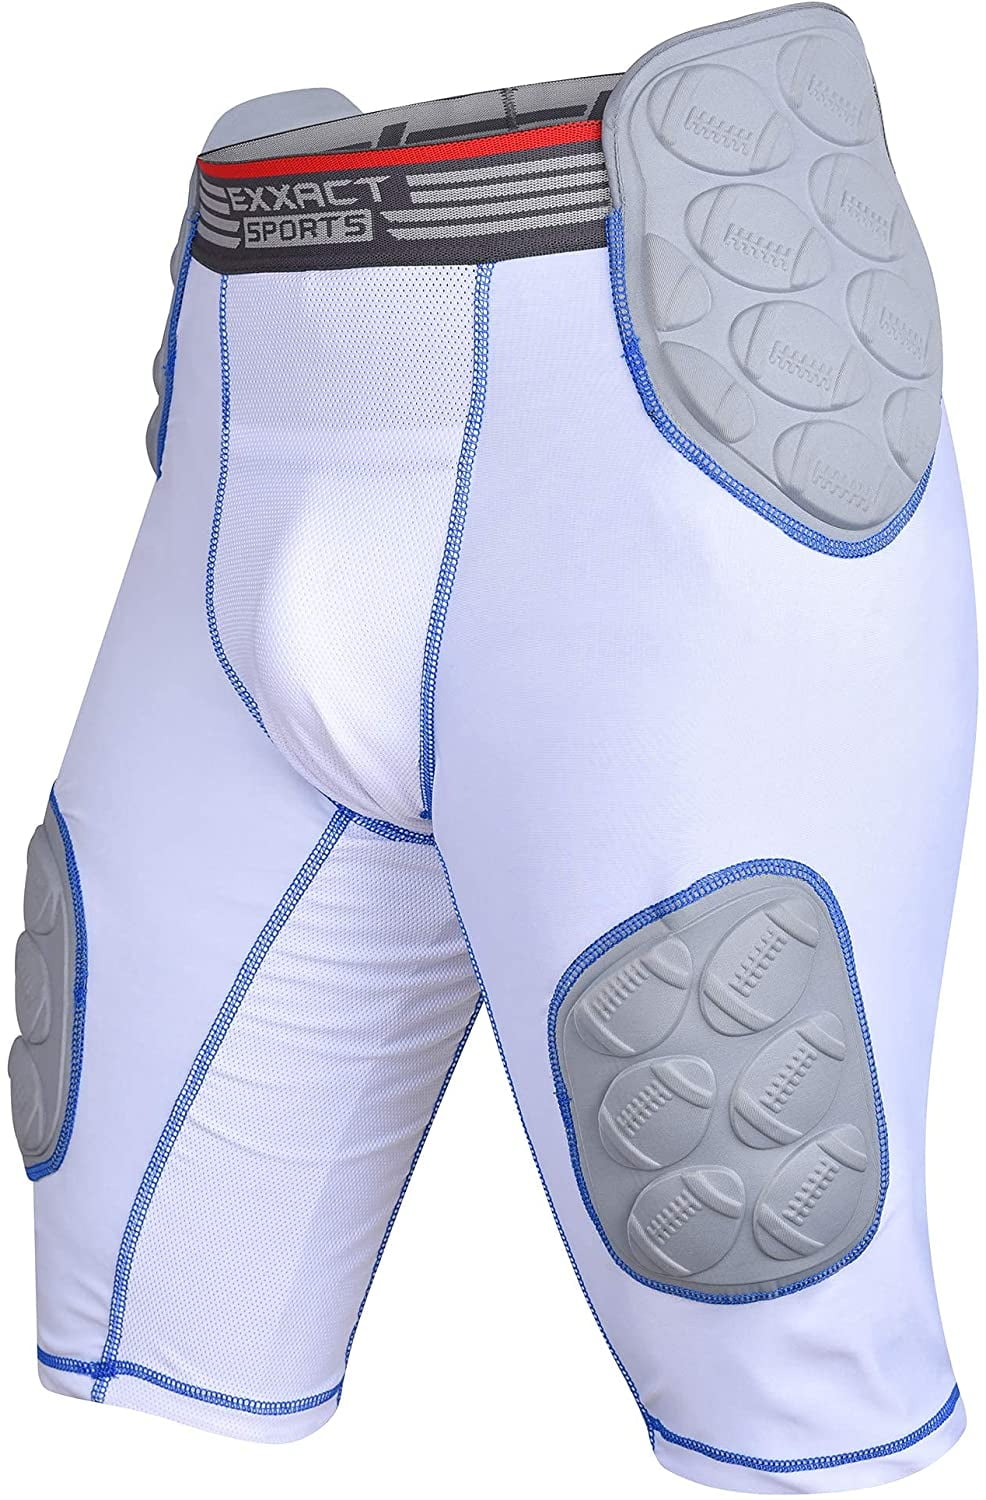 Protective Football Pads Compression Exxact Sports Adult Touchdown 5-Pad Football Girdle w/Integrated Hip Thighs and Tailbone Pads w/Cup Pocket Adult 